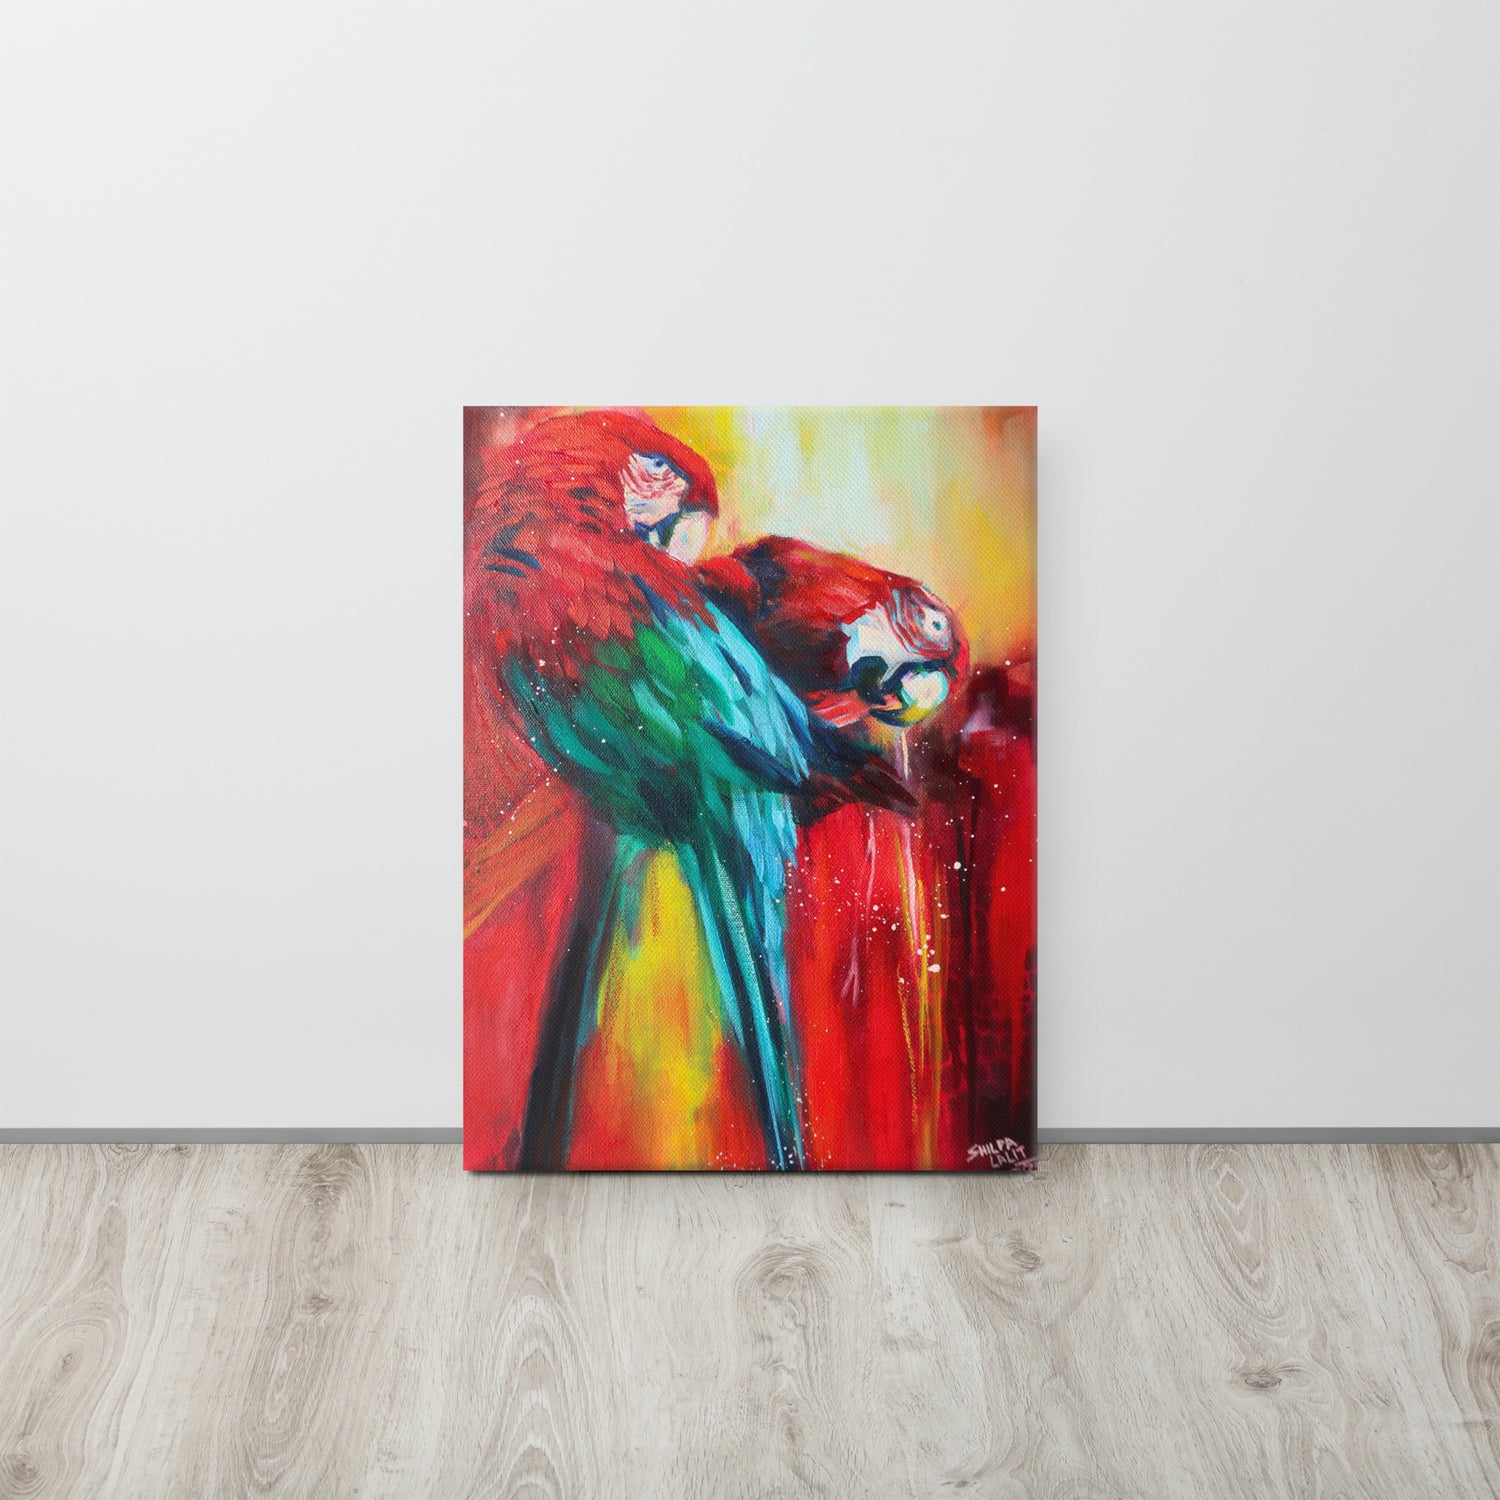 CANVAS PRINT :- “ COVER ME IN LOVE “